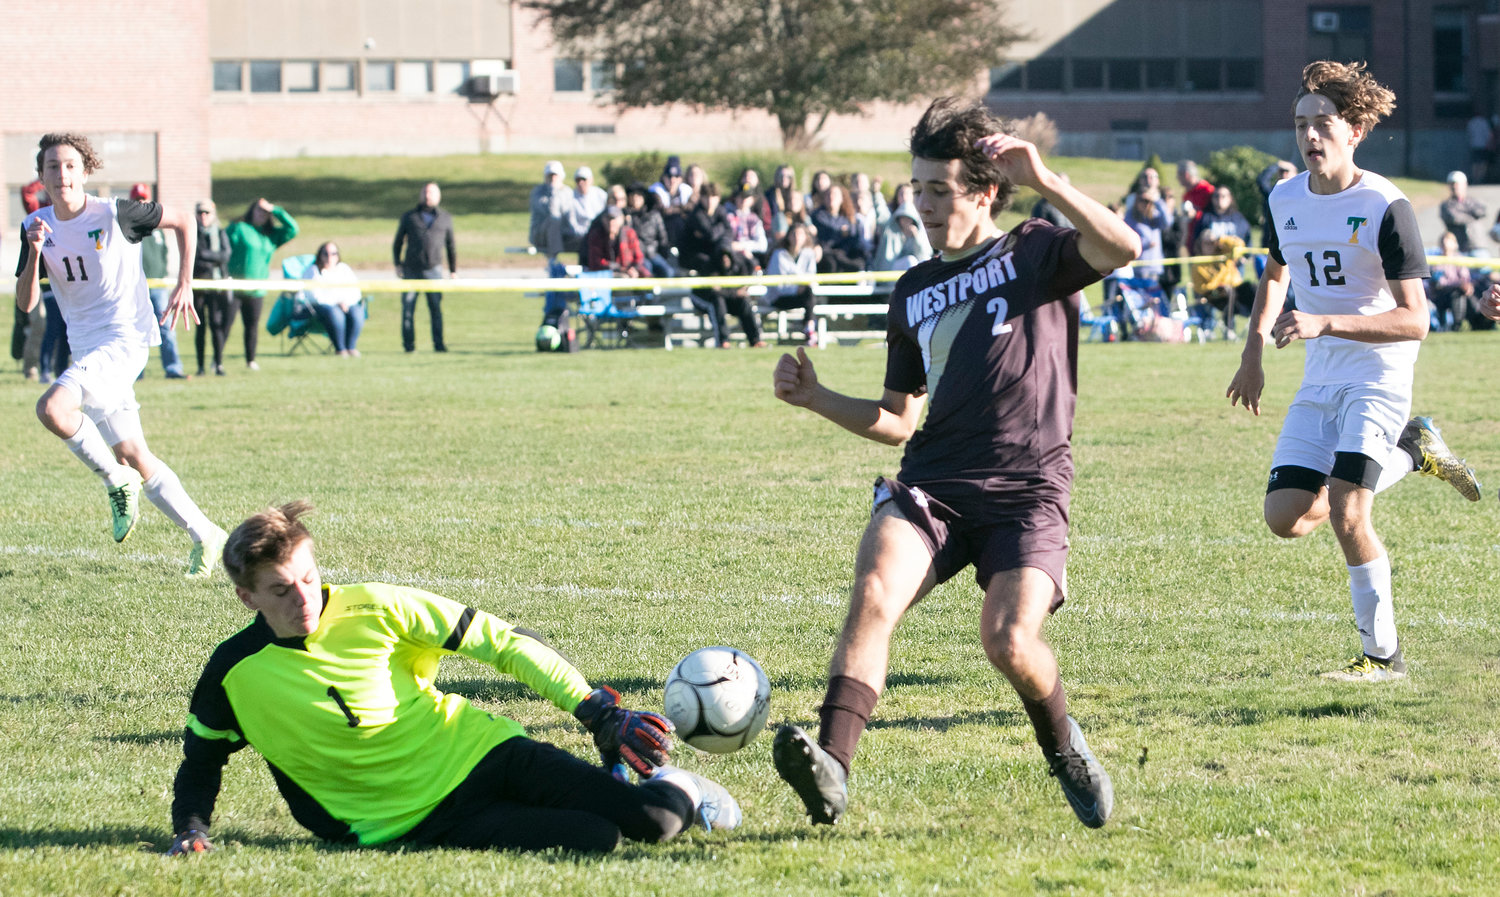 Striker Hunter Brodeur dribbles over Braves goalkeeper Tim Parsons and taps the ball into the net for his second goal of the game to give Westport a, 3-0 lead in the second half.